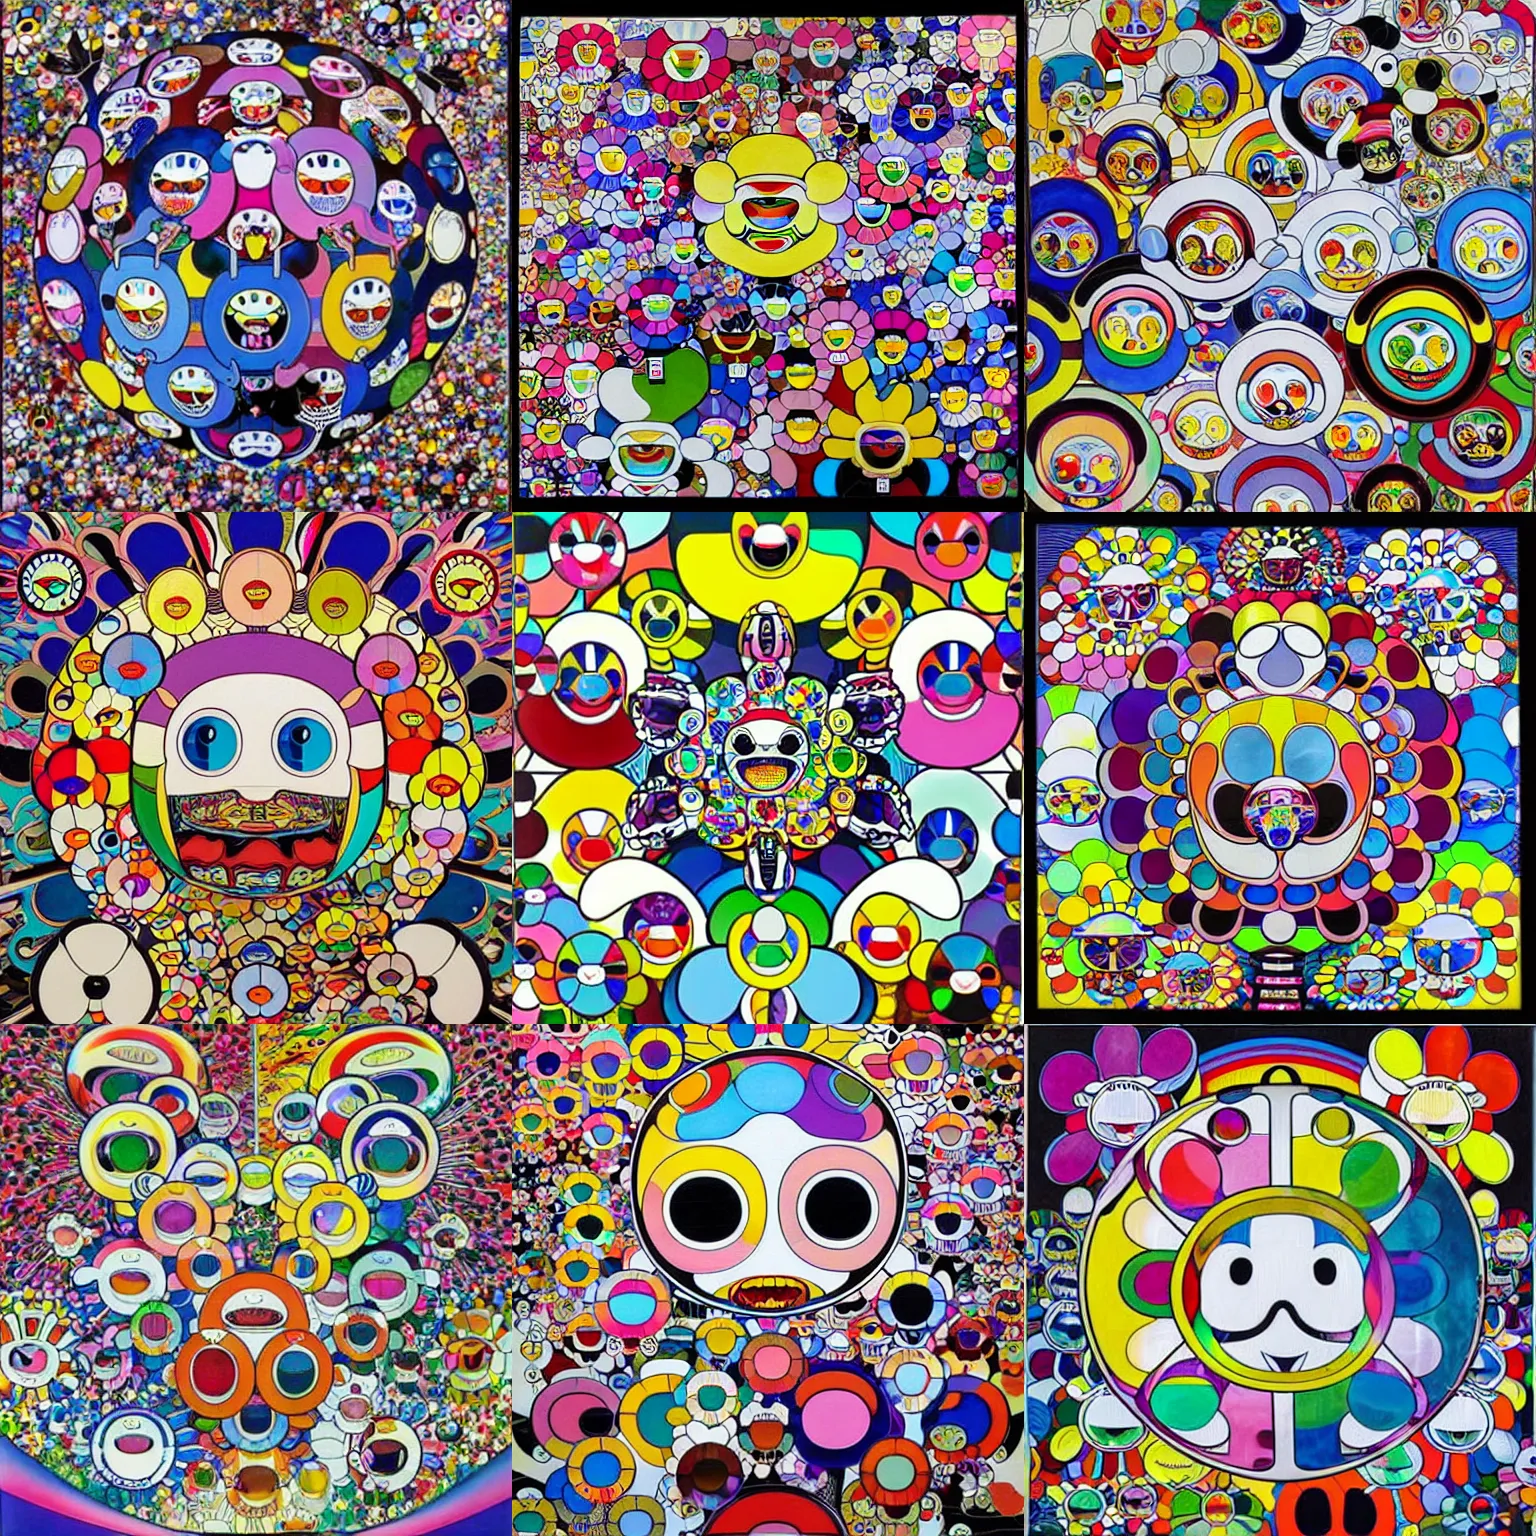 Prompt: Takashi Murakami painting by alex grey, android jones, chris dyer, and aaron brooks